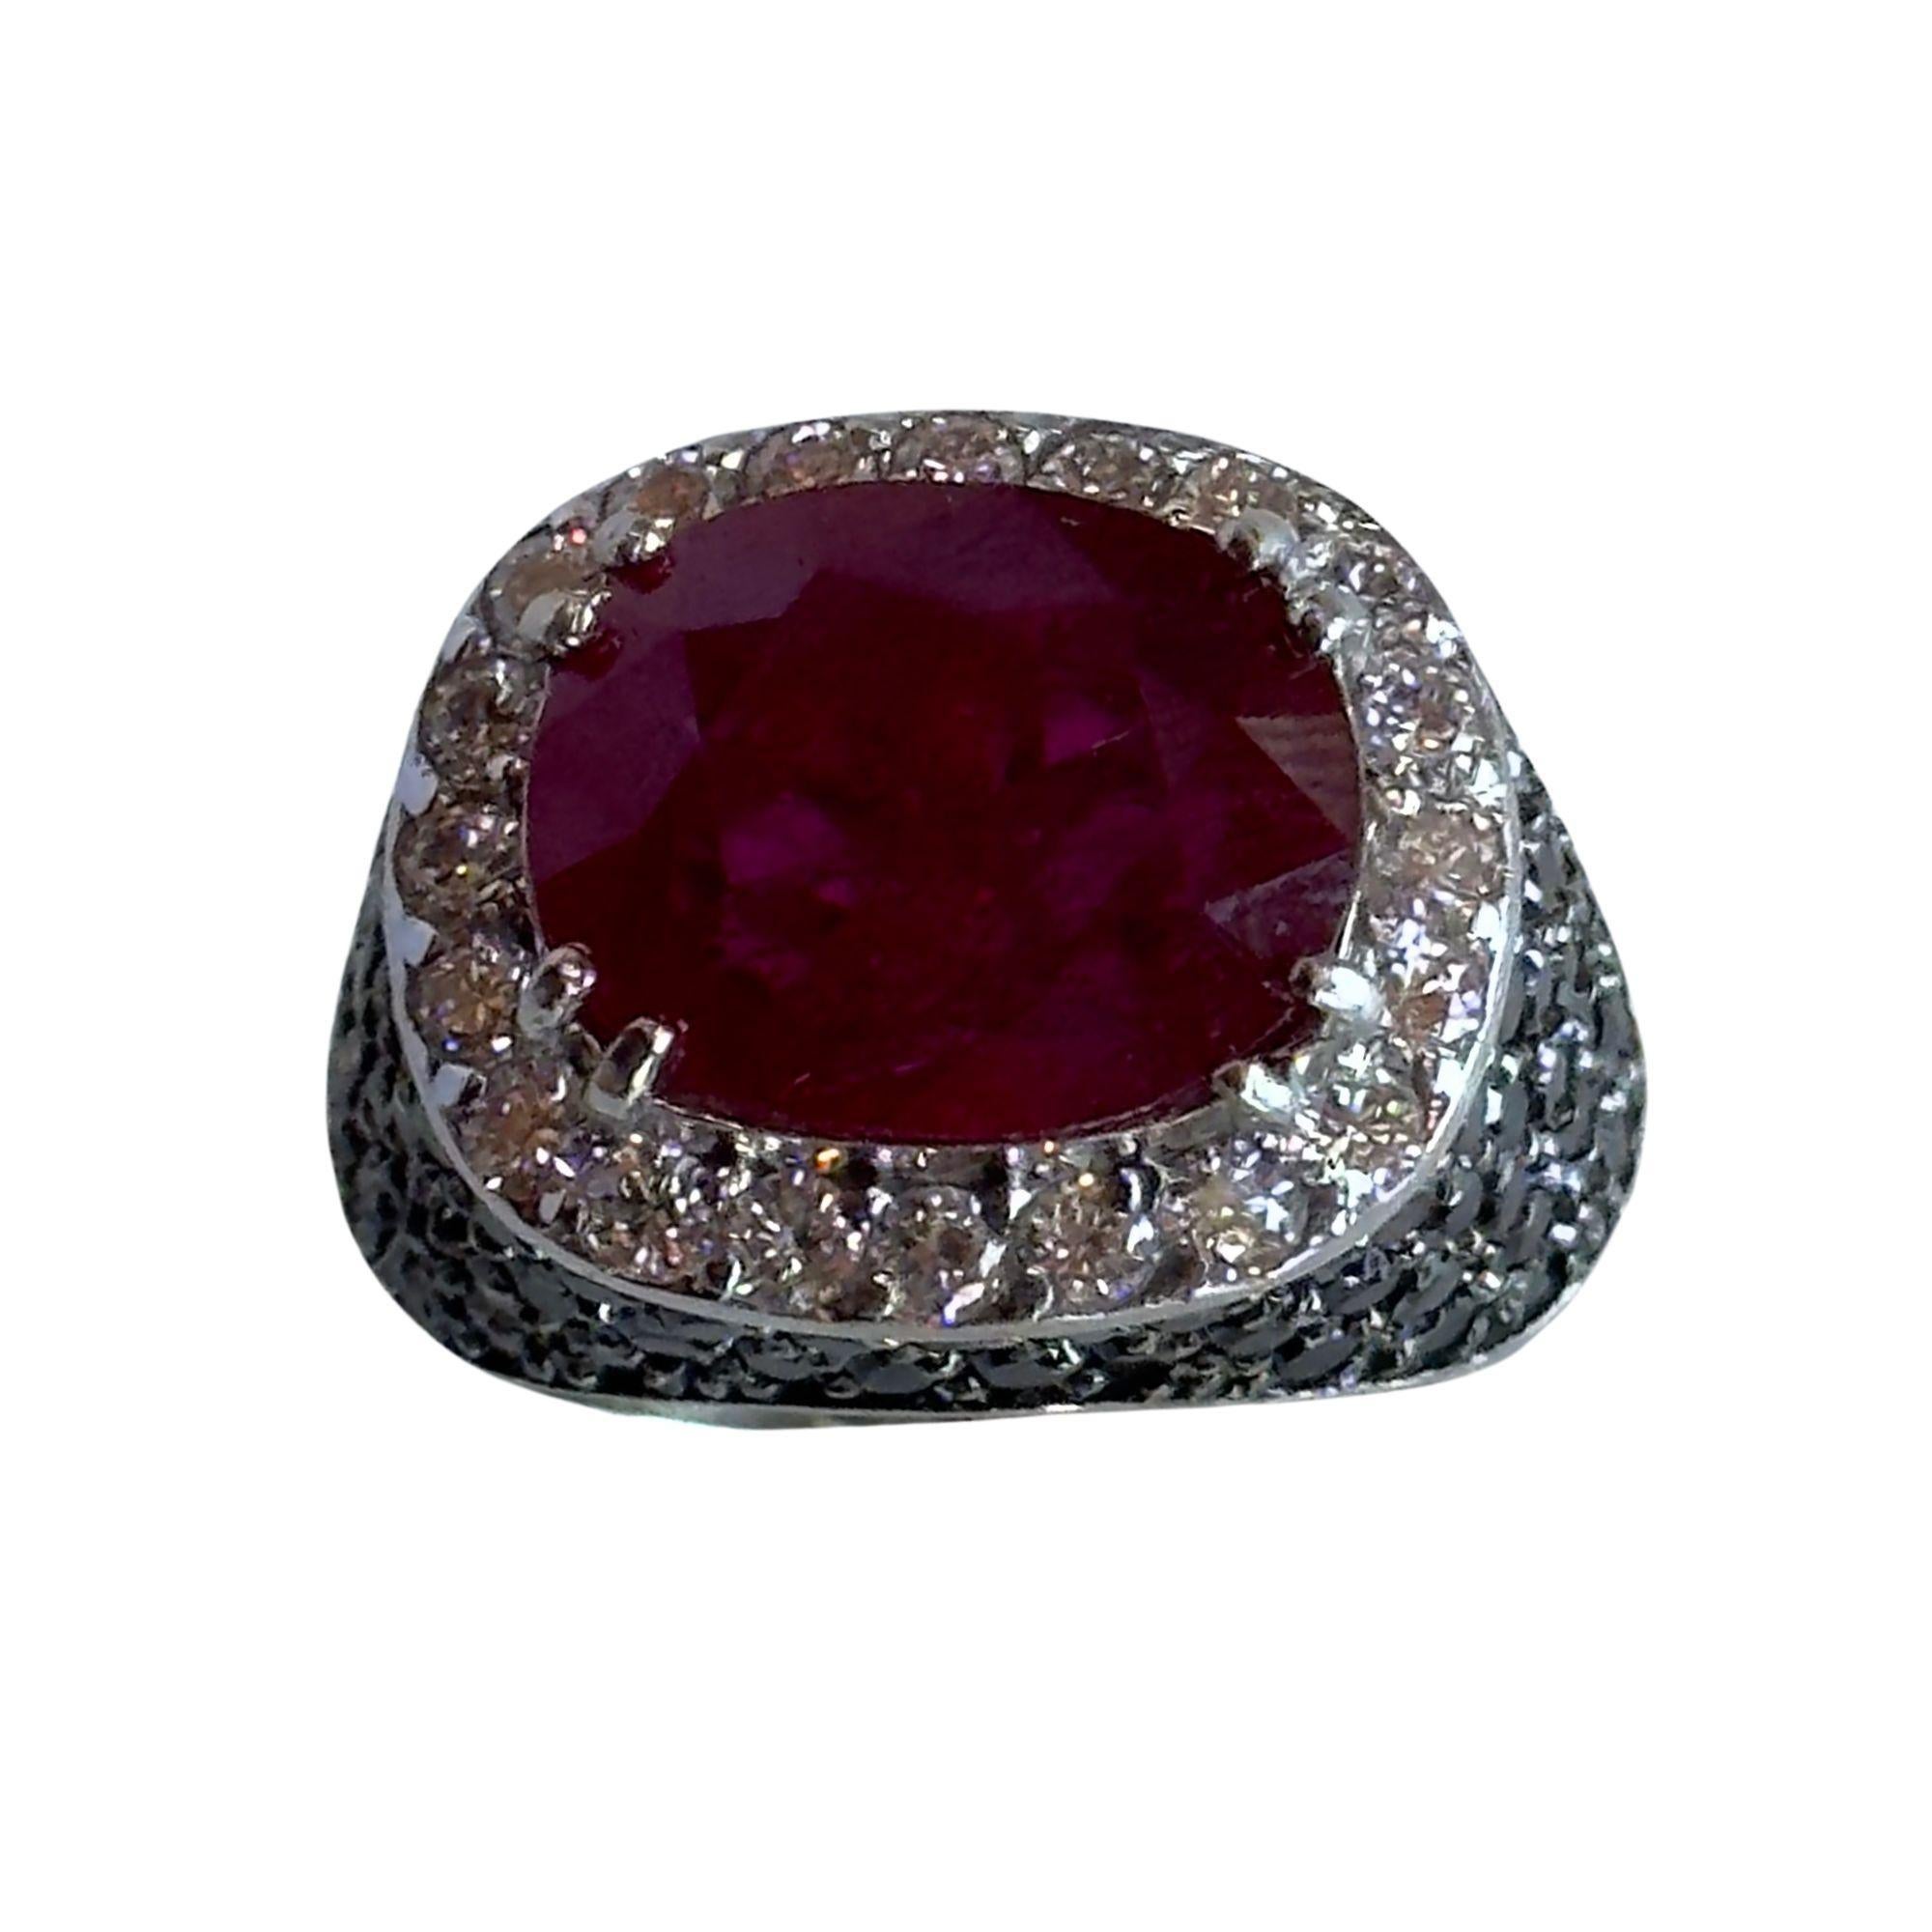 This 18k white gold ring boasts a stunning black diamonds weighing 3.50 carats, complemented by a 0.61 carats of white diamonds and a beautiful 5.11 carat ruby in the center. In good condition with minor surface wear, this ring is a timeless